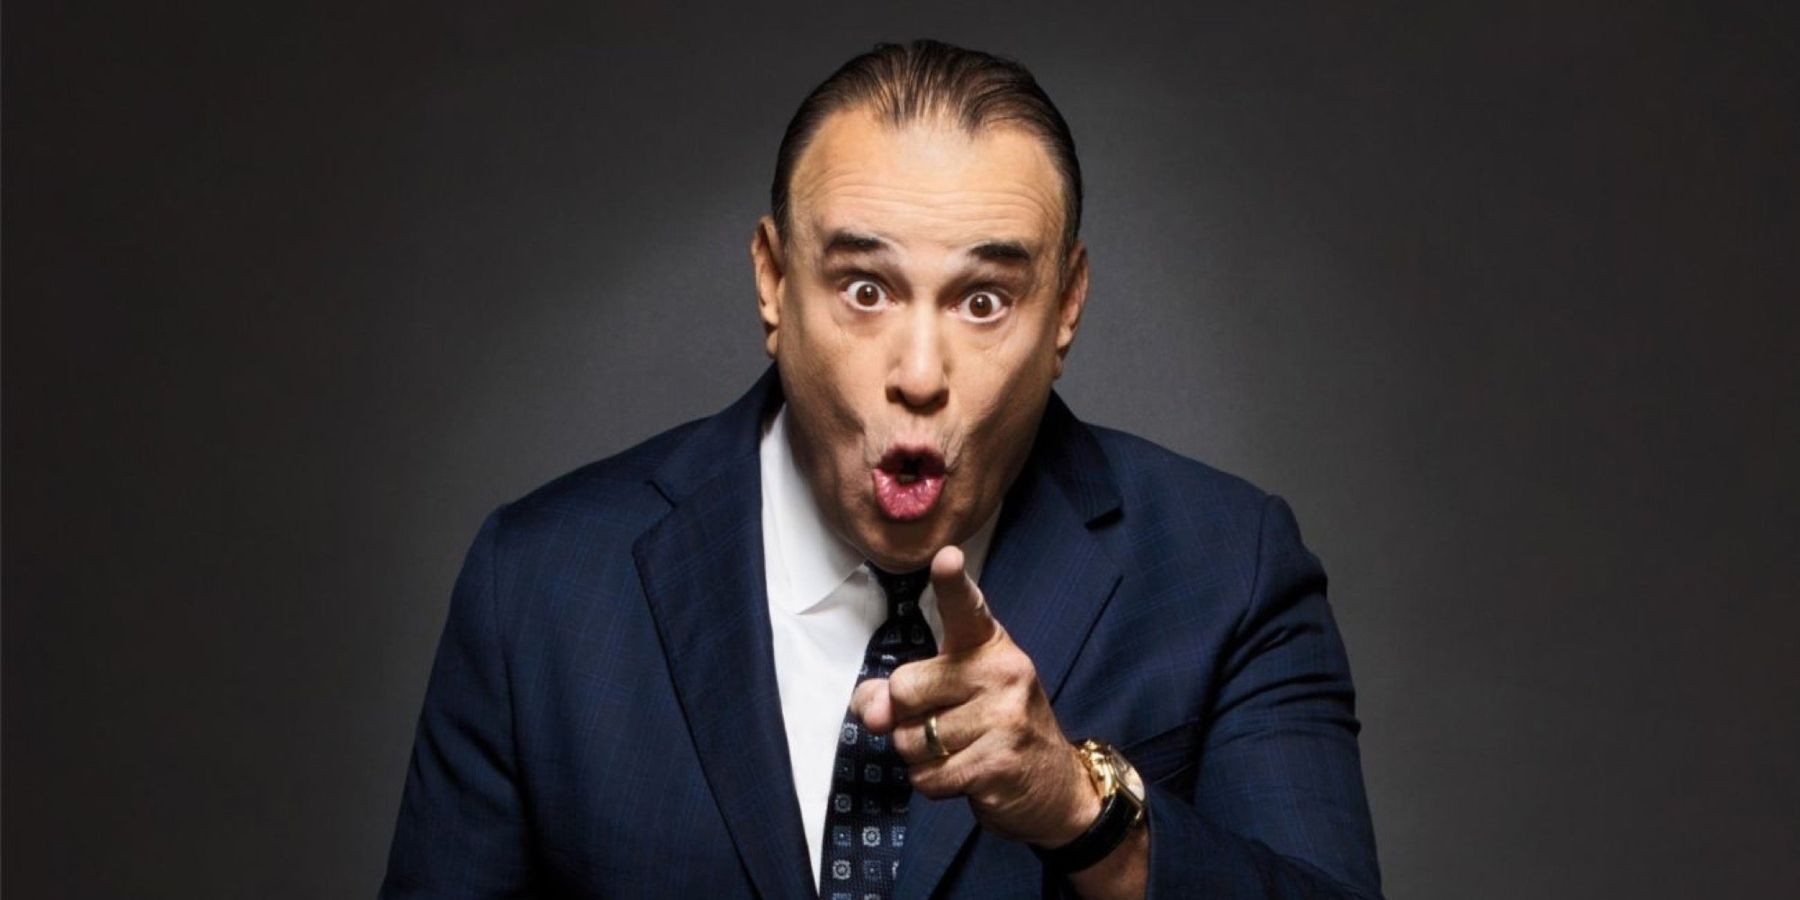 Jon Taffer Yelling and Pointing At the Camera